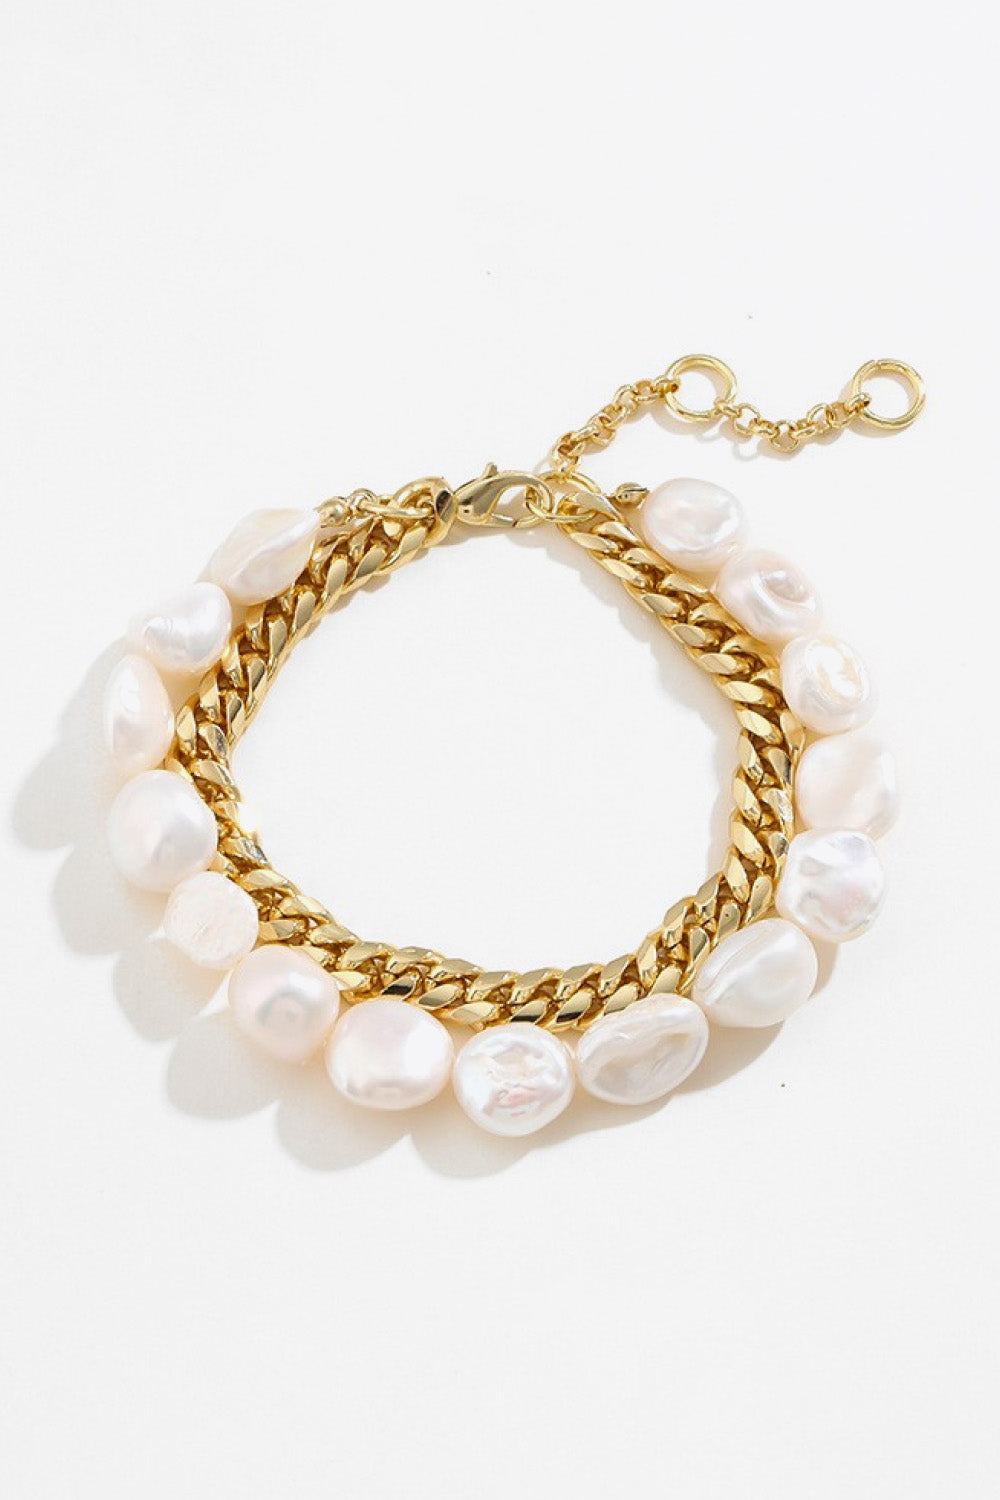 Two-Tone Double-Layered Bracelet - Bracelets - FITGGINS